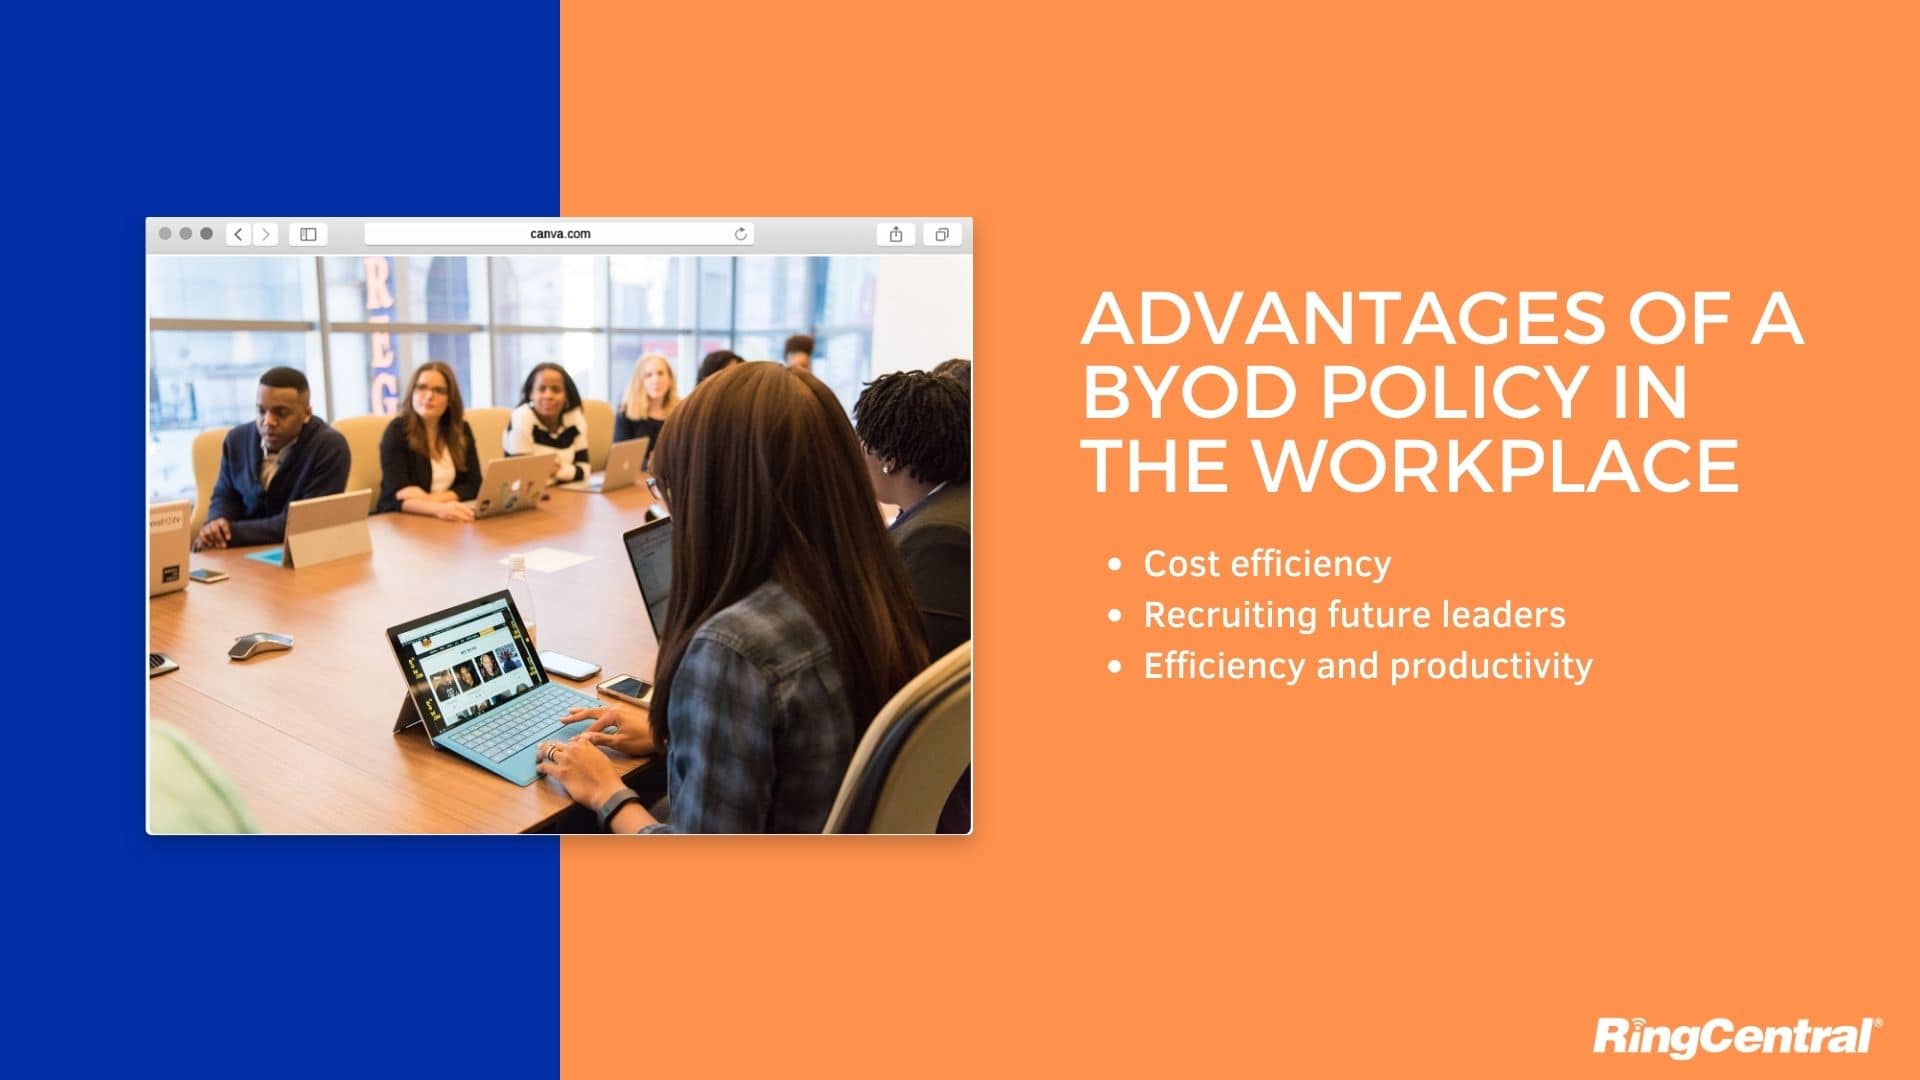 Advantages of a BYOD policy in the workplace